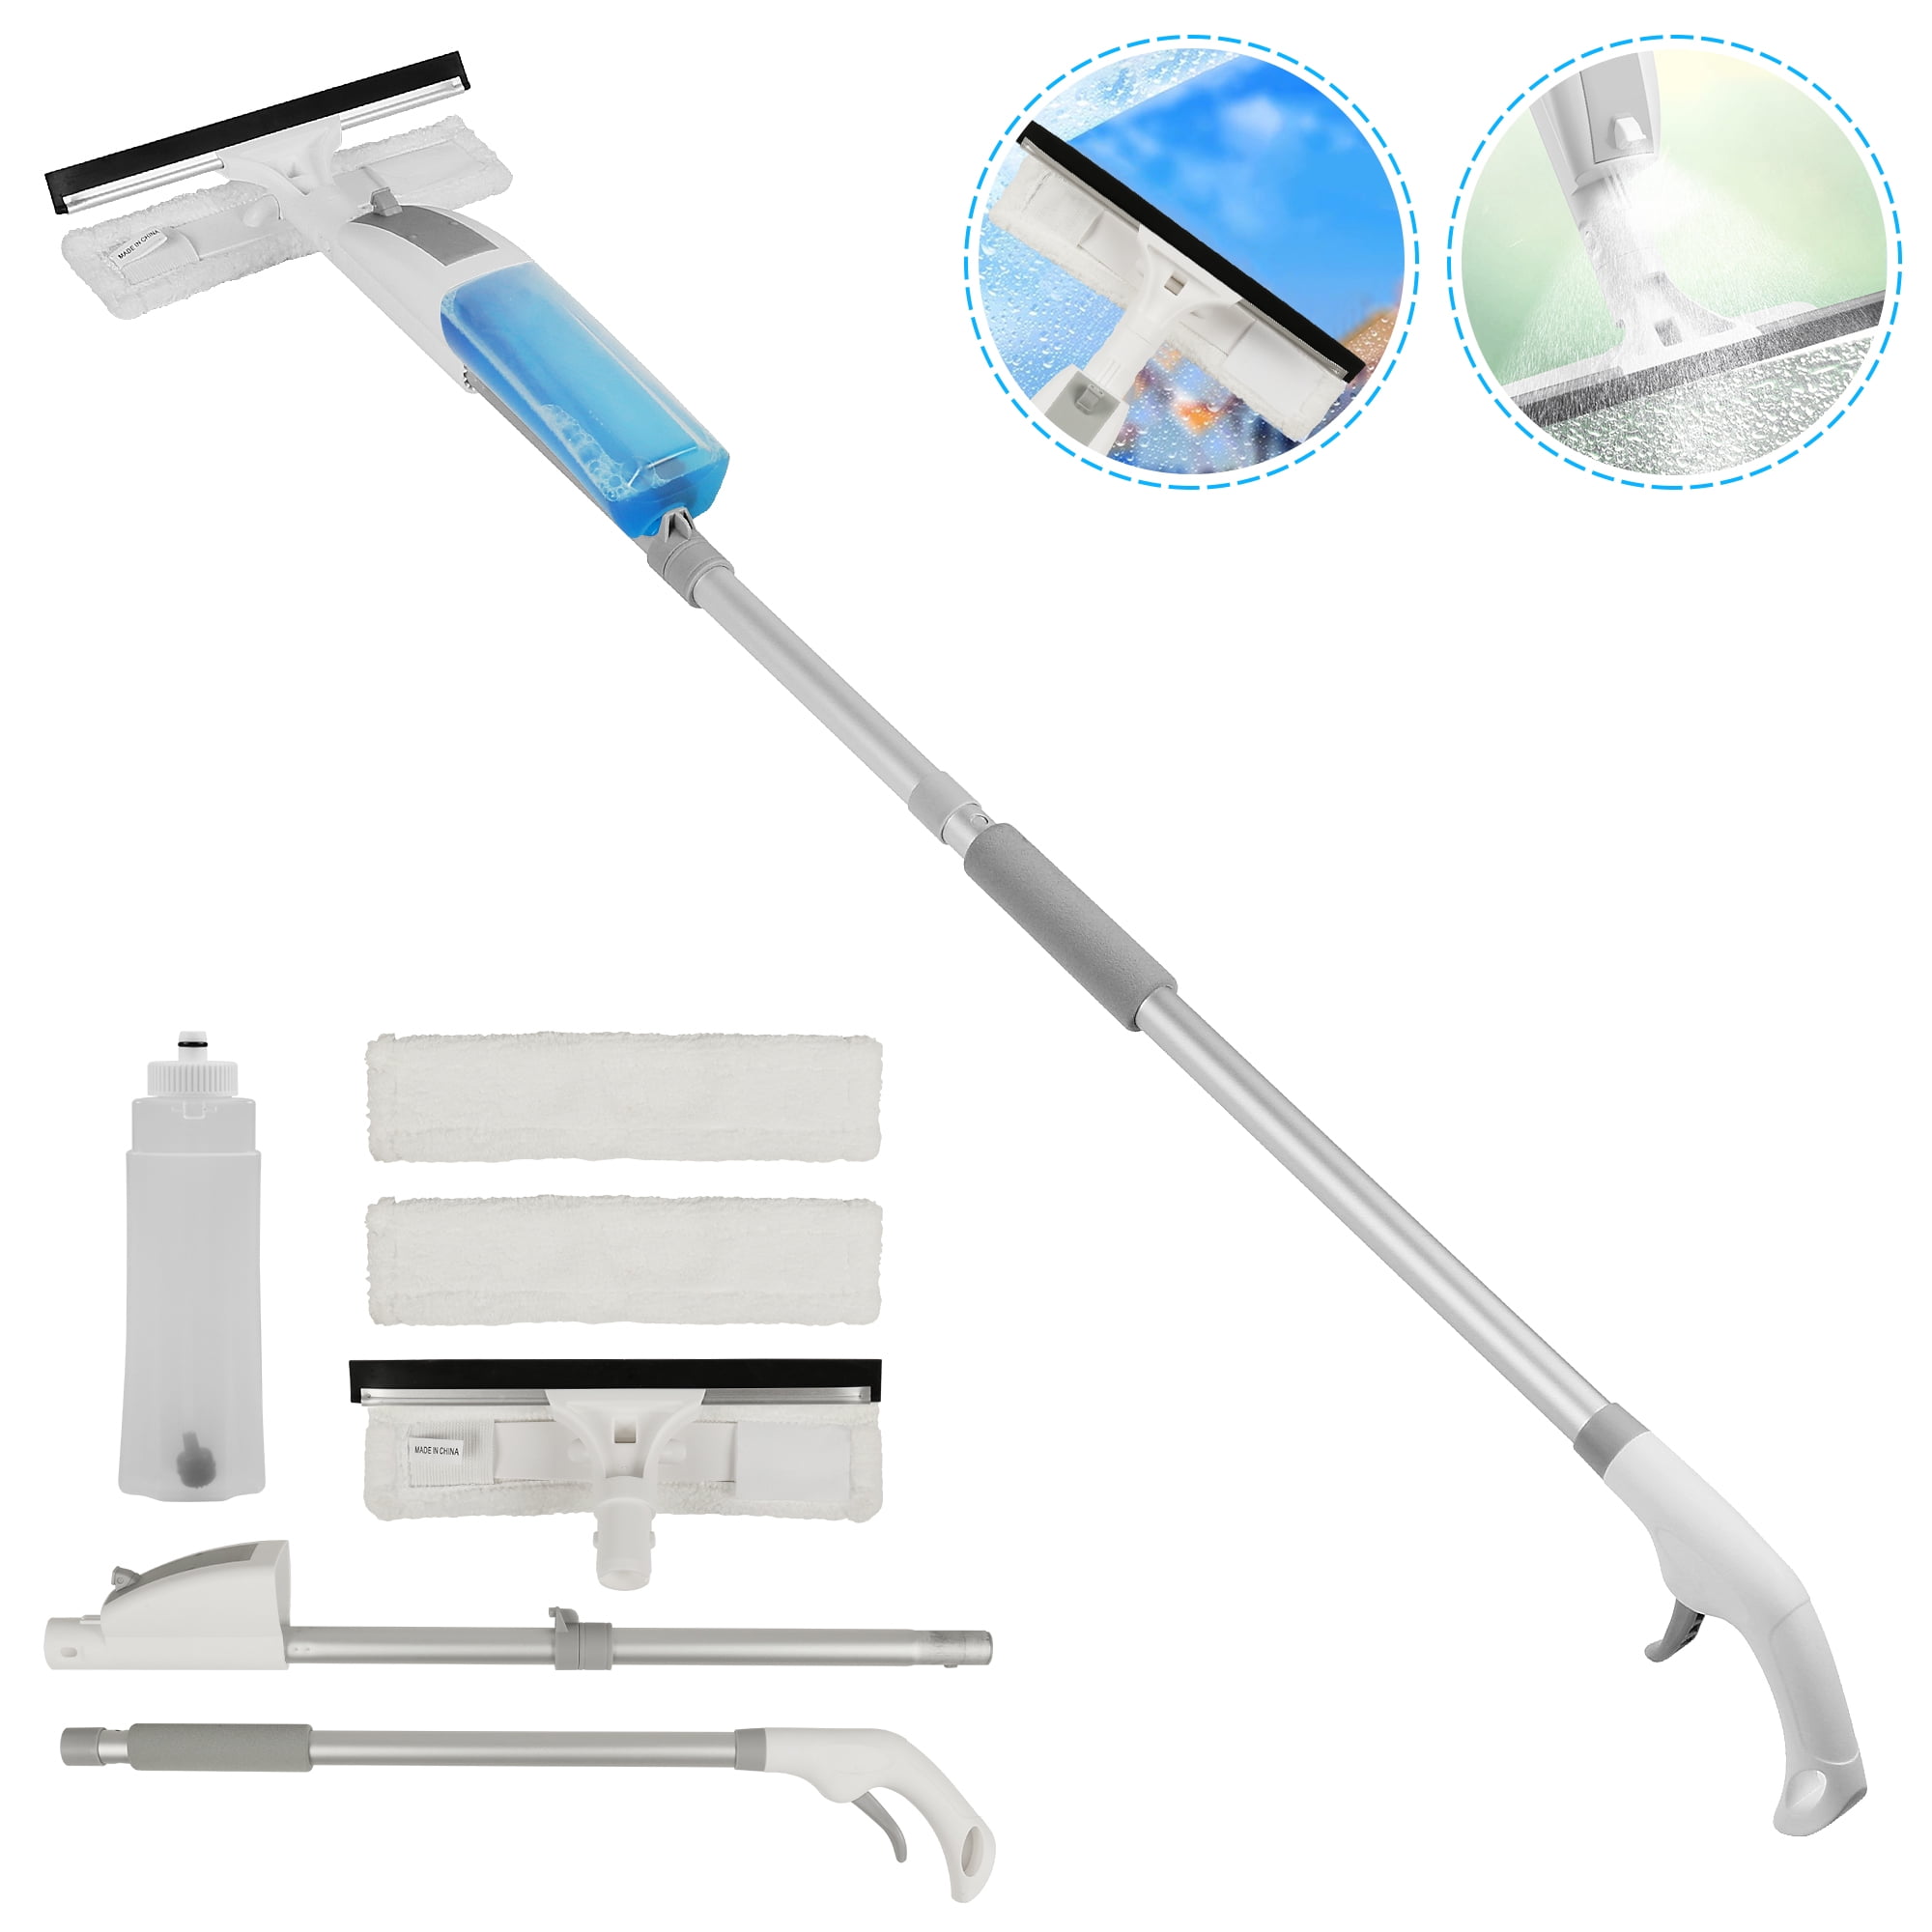 MATCC Car Wash Cleaning Brush Window Squeegee Cleaner Long Pole 2in1 Telescopic 